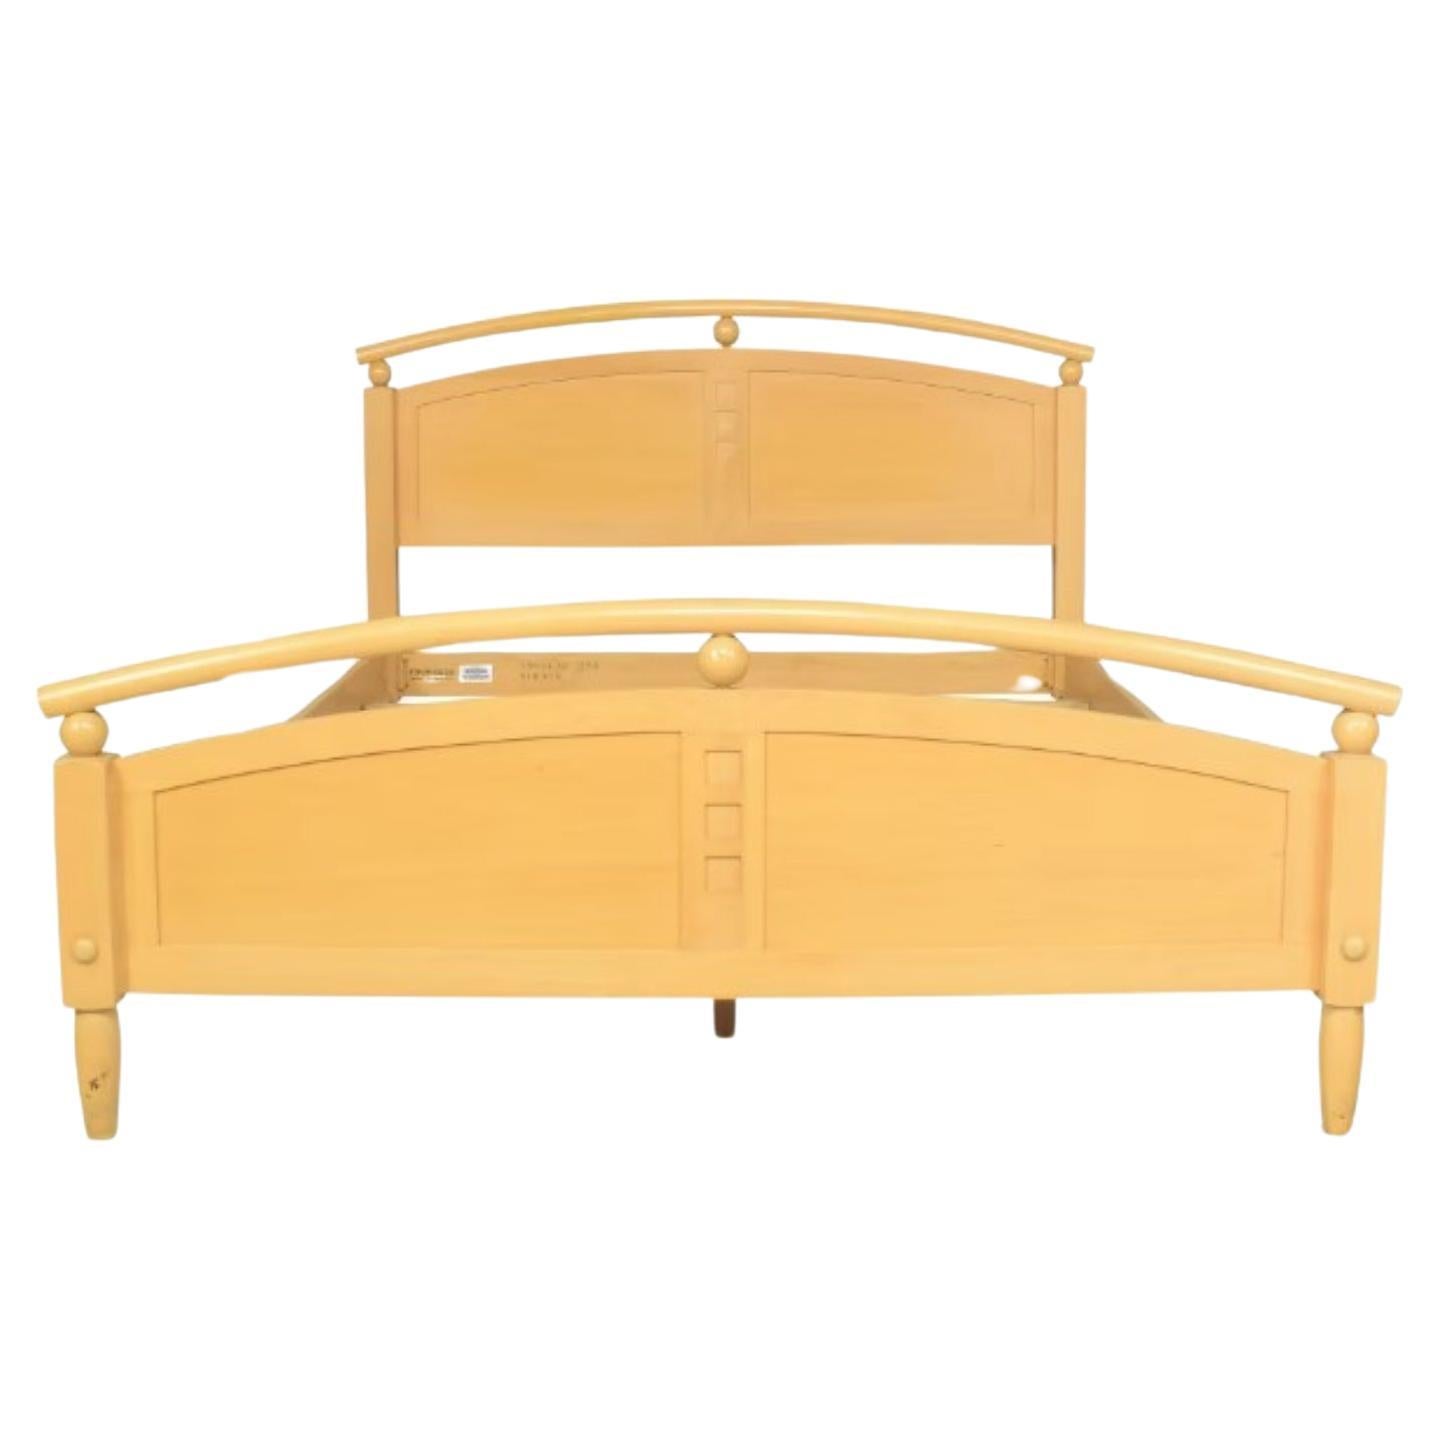 Late 20th Century American Solid Birch Arch Full Size Bedstead